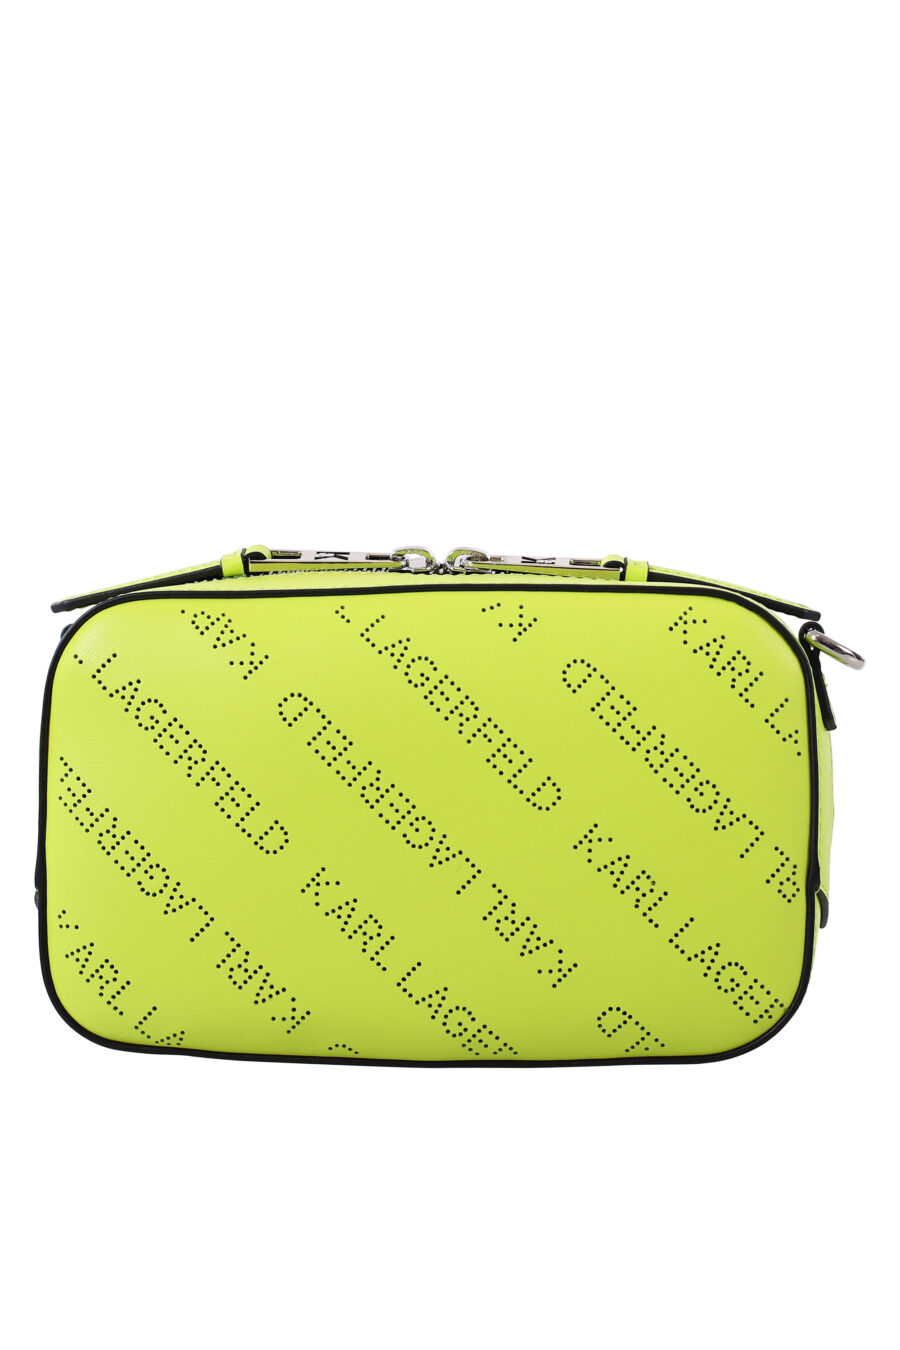 Lime green shoulder bag with perforated logo - IMG 1737